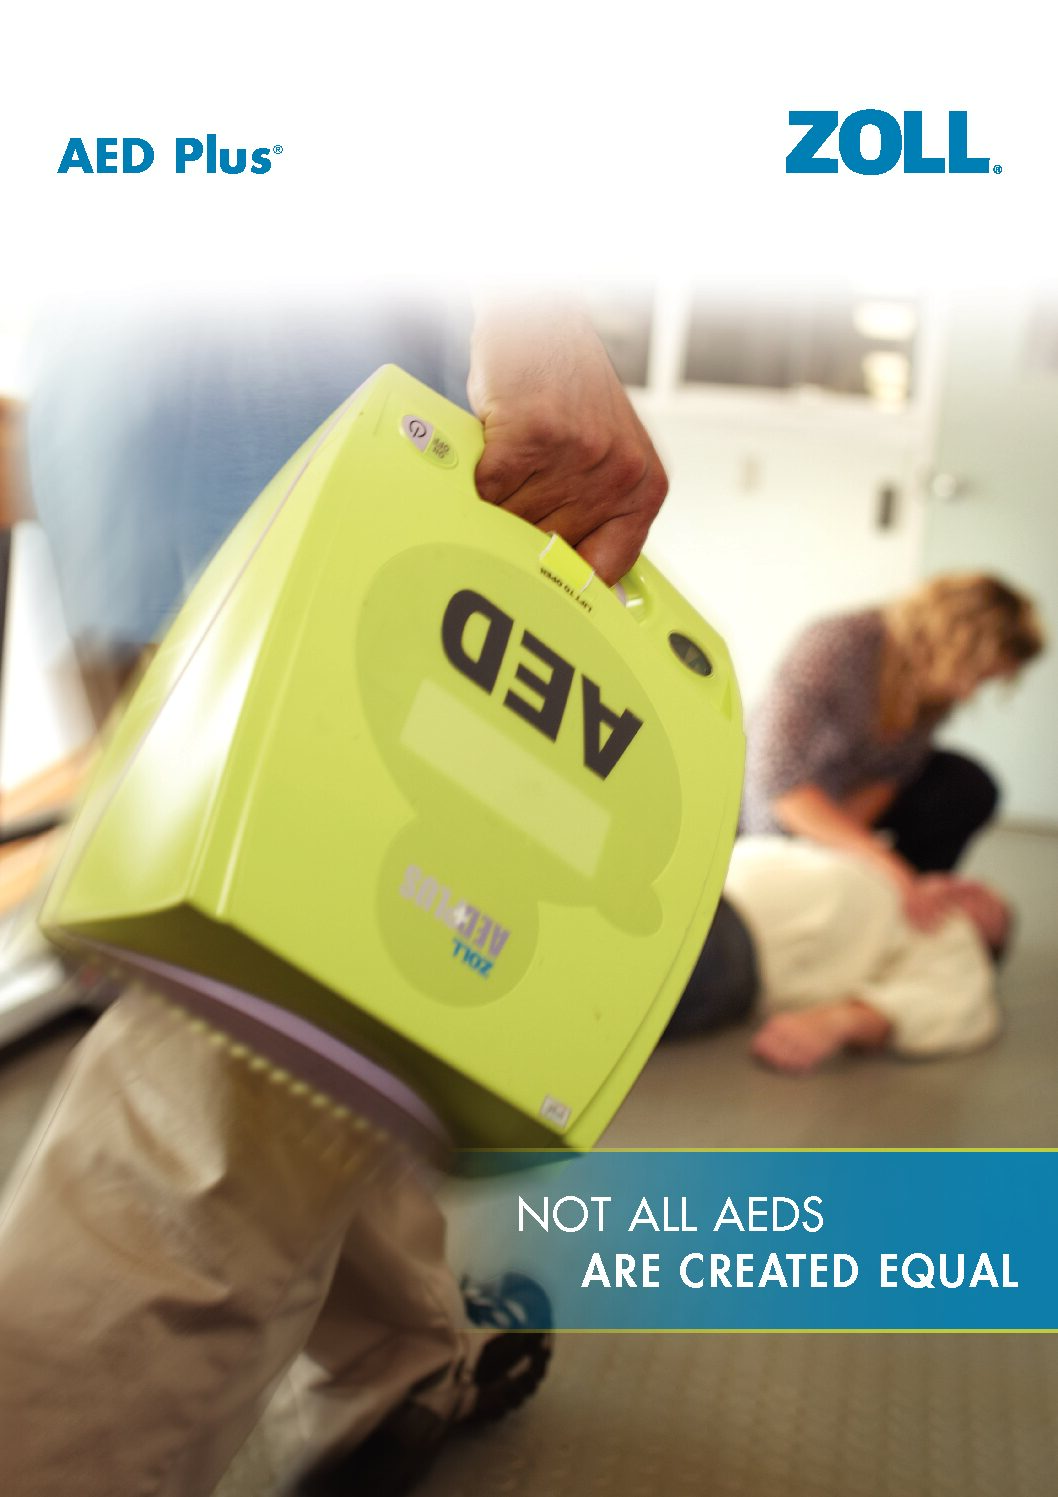 ZOLL AED Plus Defibrillator - Cardiacx Automated External Defibrillator